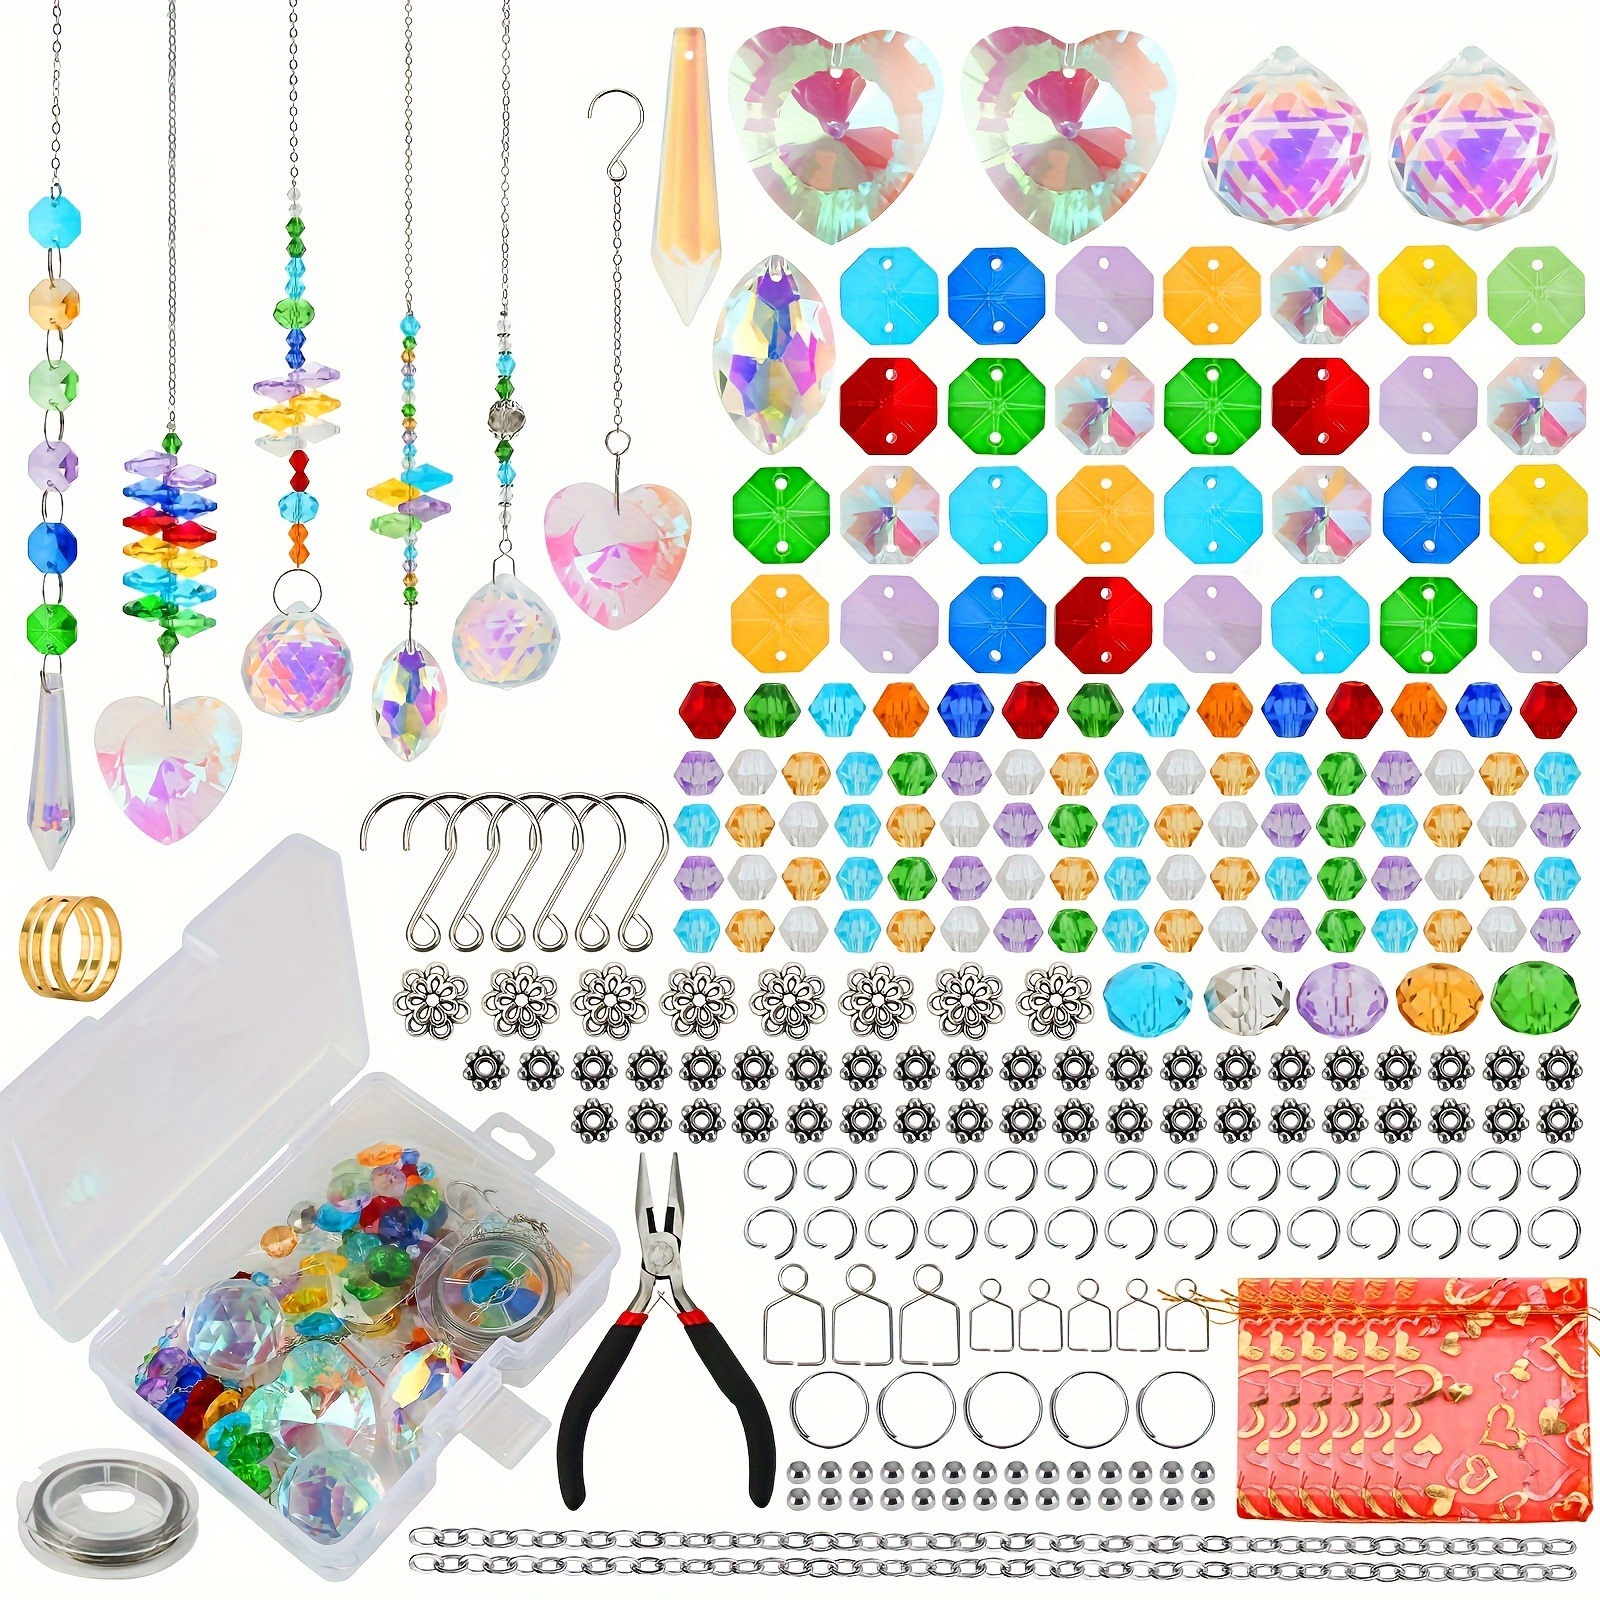 

460-piece Diy Suncatcher Kit With Colorful Crystal Beads & Rainbow Prism - Perfect For Window Hangings, Indoor/outdoor Garden Decor Capture The Sunshine